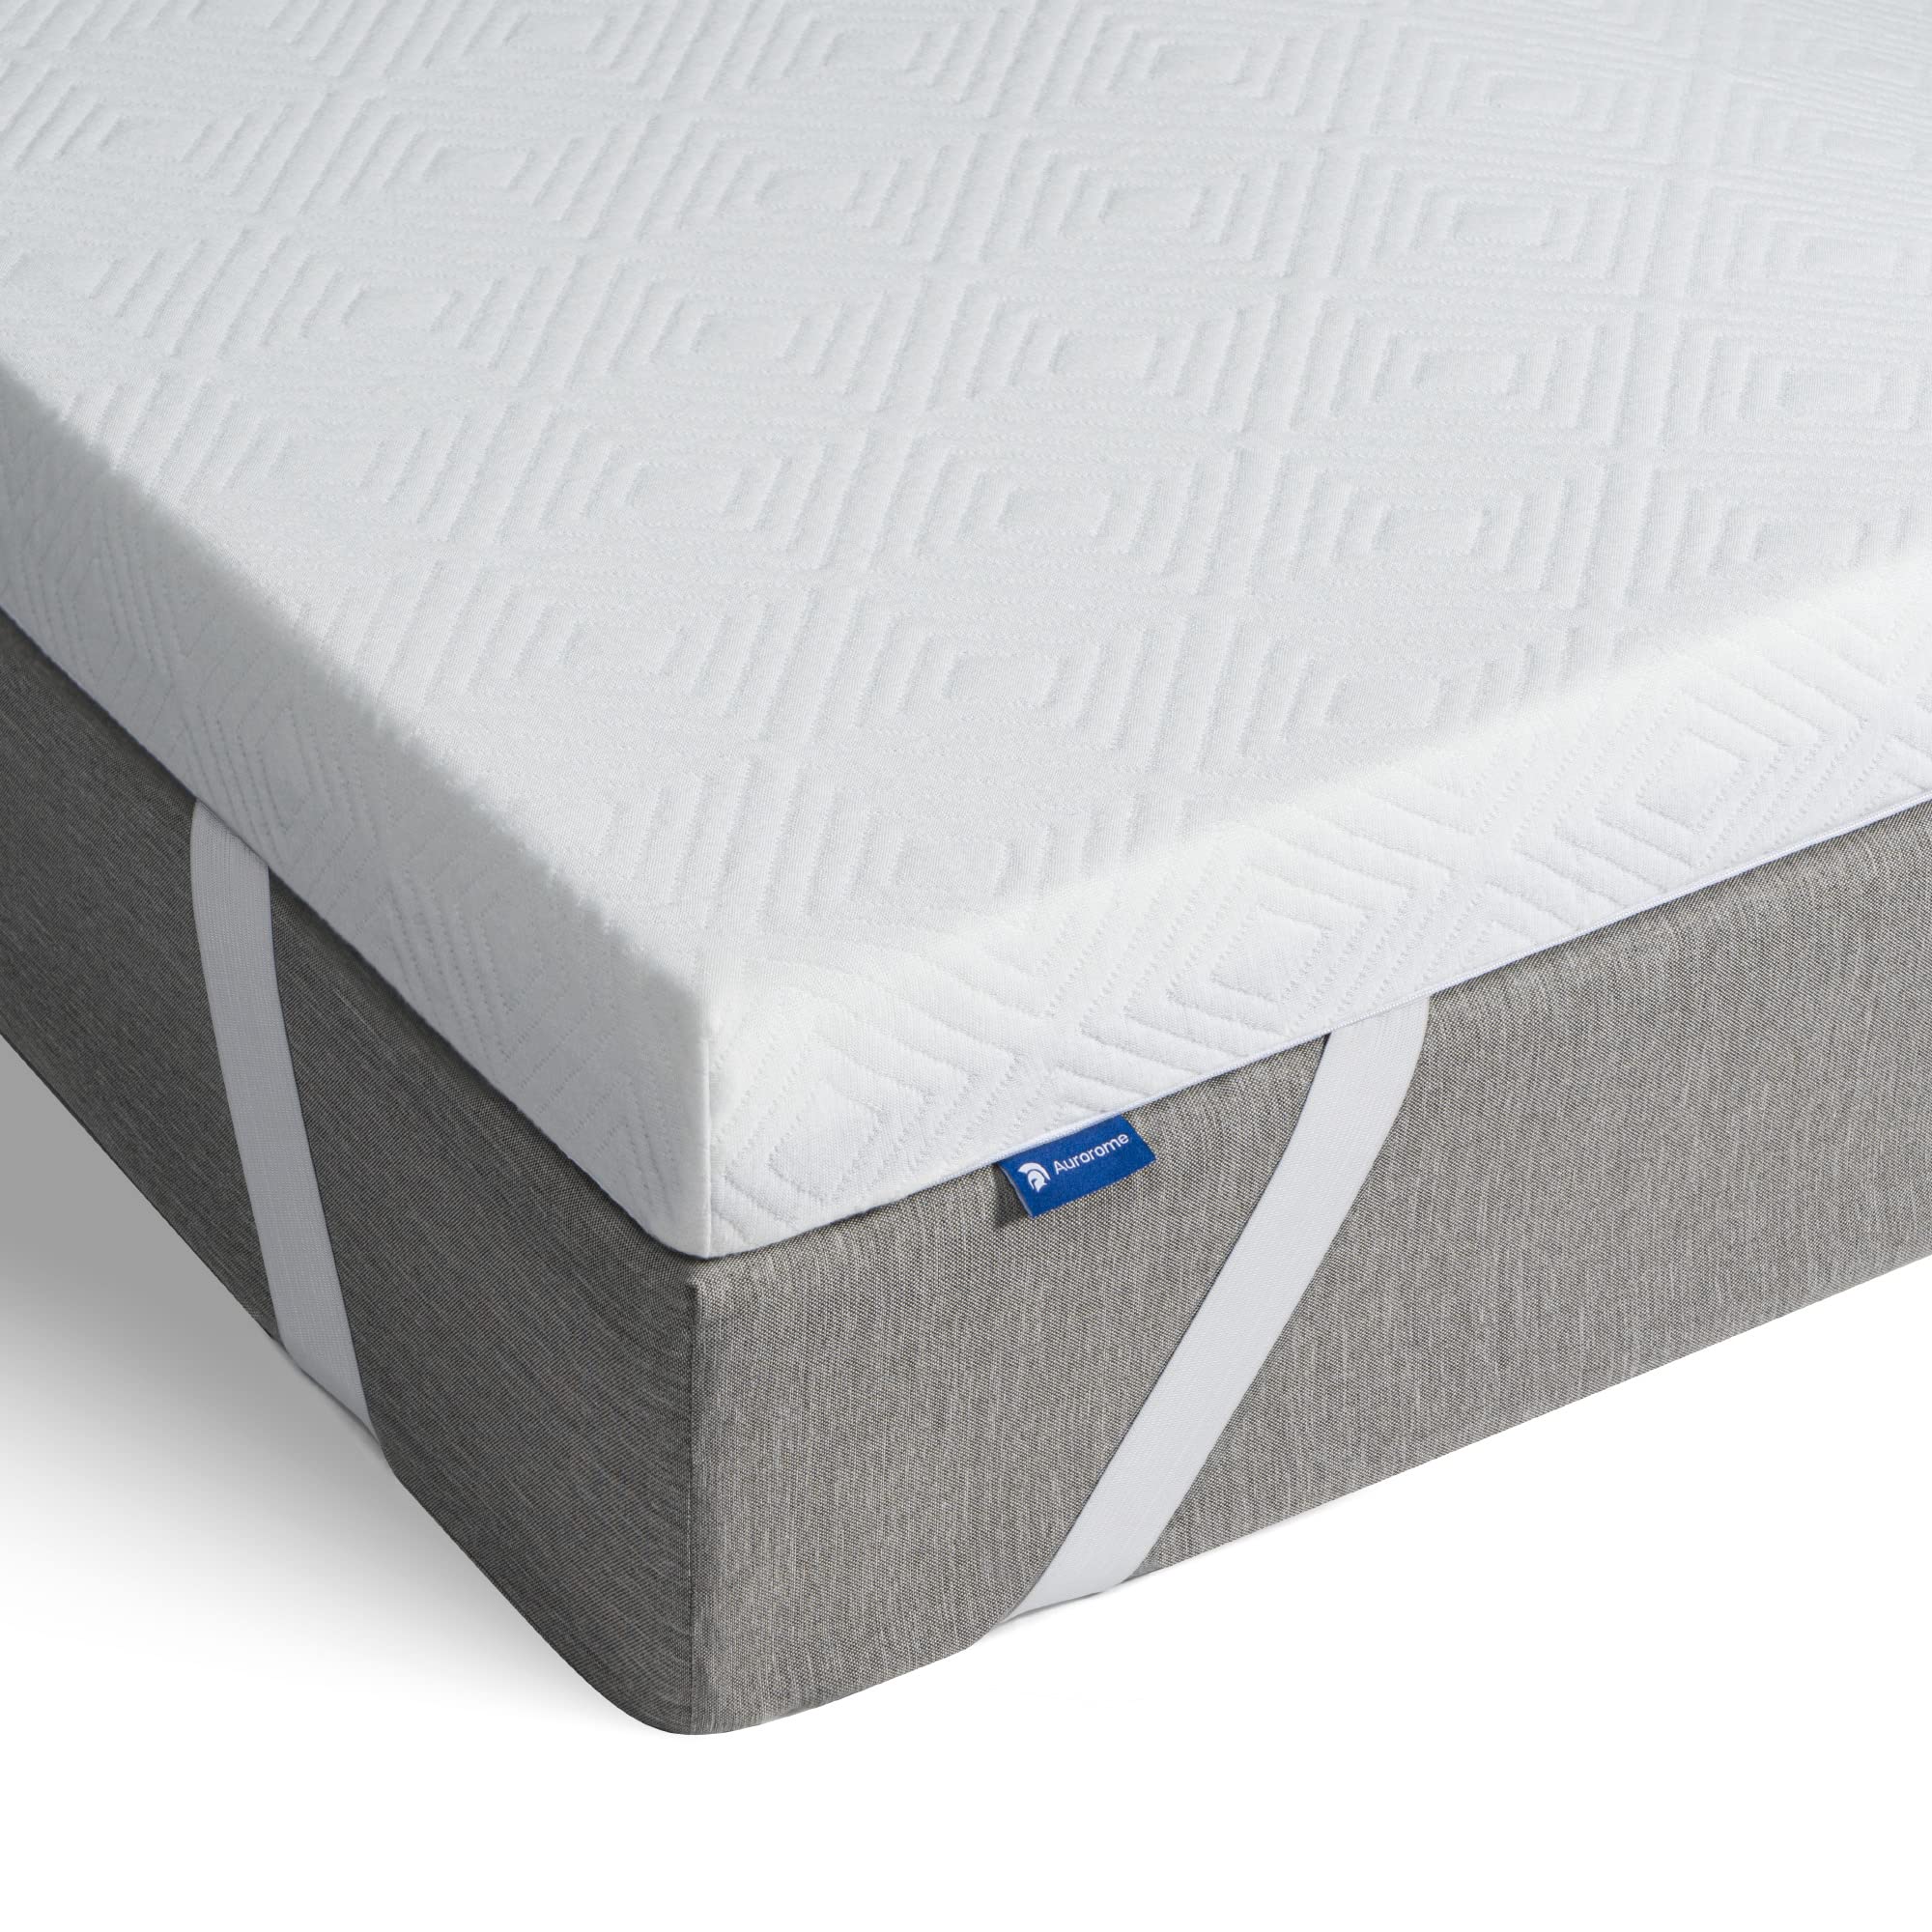 Aurorome Dual-Layer Foam Mattress Topper Small Double Size - Firm Mattress Topper for Upgraded Support - 7CM Bed Topper with Washable Cover - 120x190